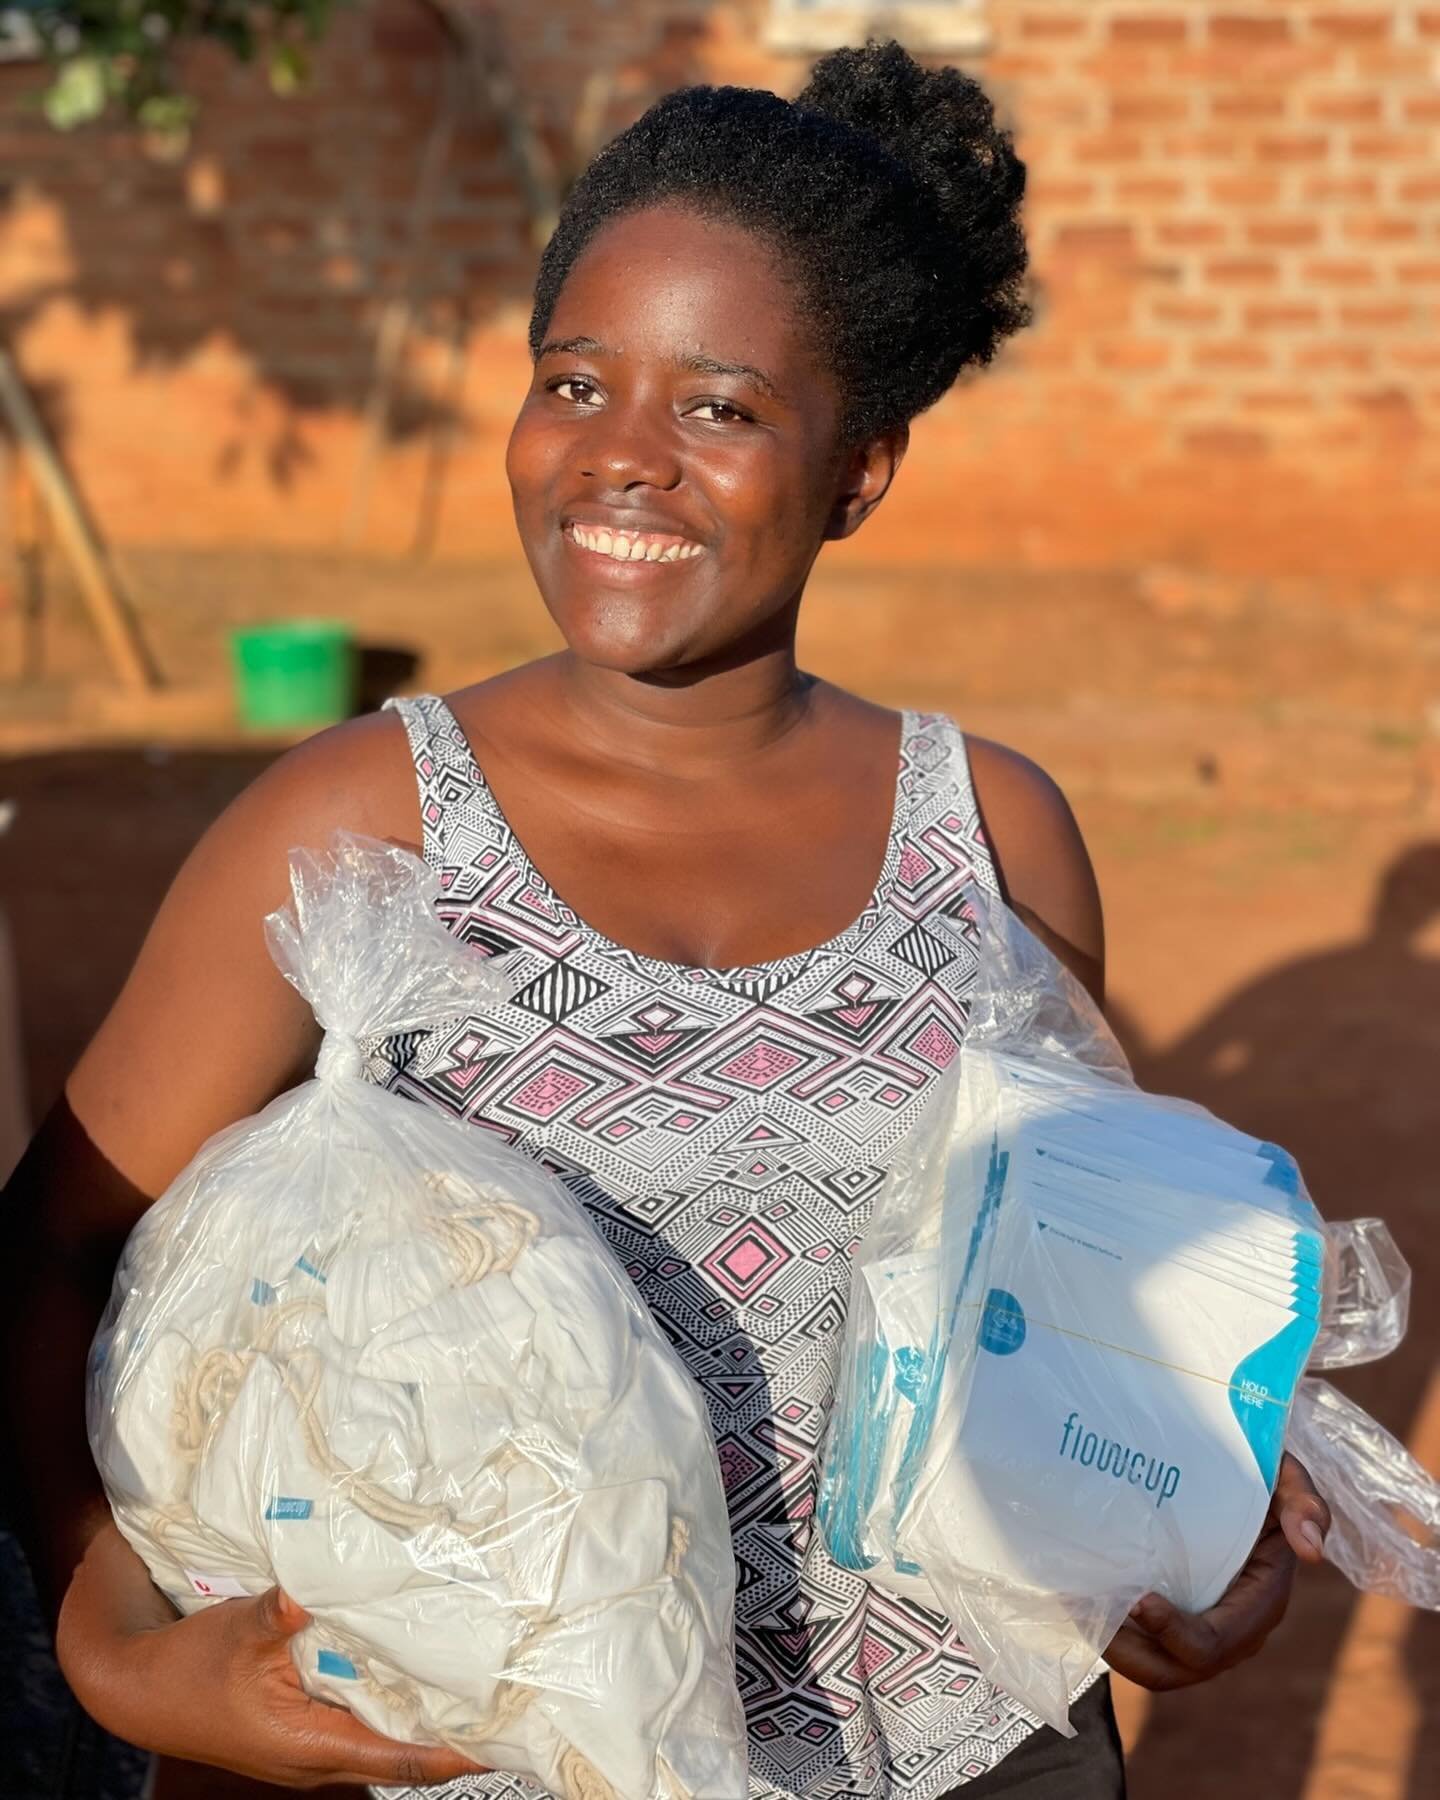 Throwback to when this beautiful soul @elubyshaba helped carry in a donation of 1,000 menstrual cups thanks to @flowcup and @thecovaproject .  Joint efforts abroad, your support financially and our work on the ground have a lasting impact on a girls 